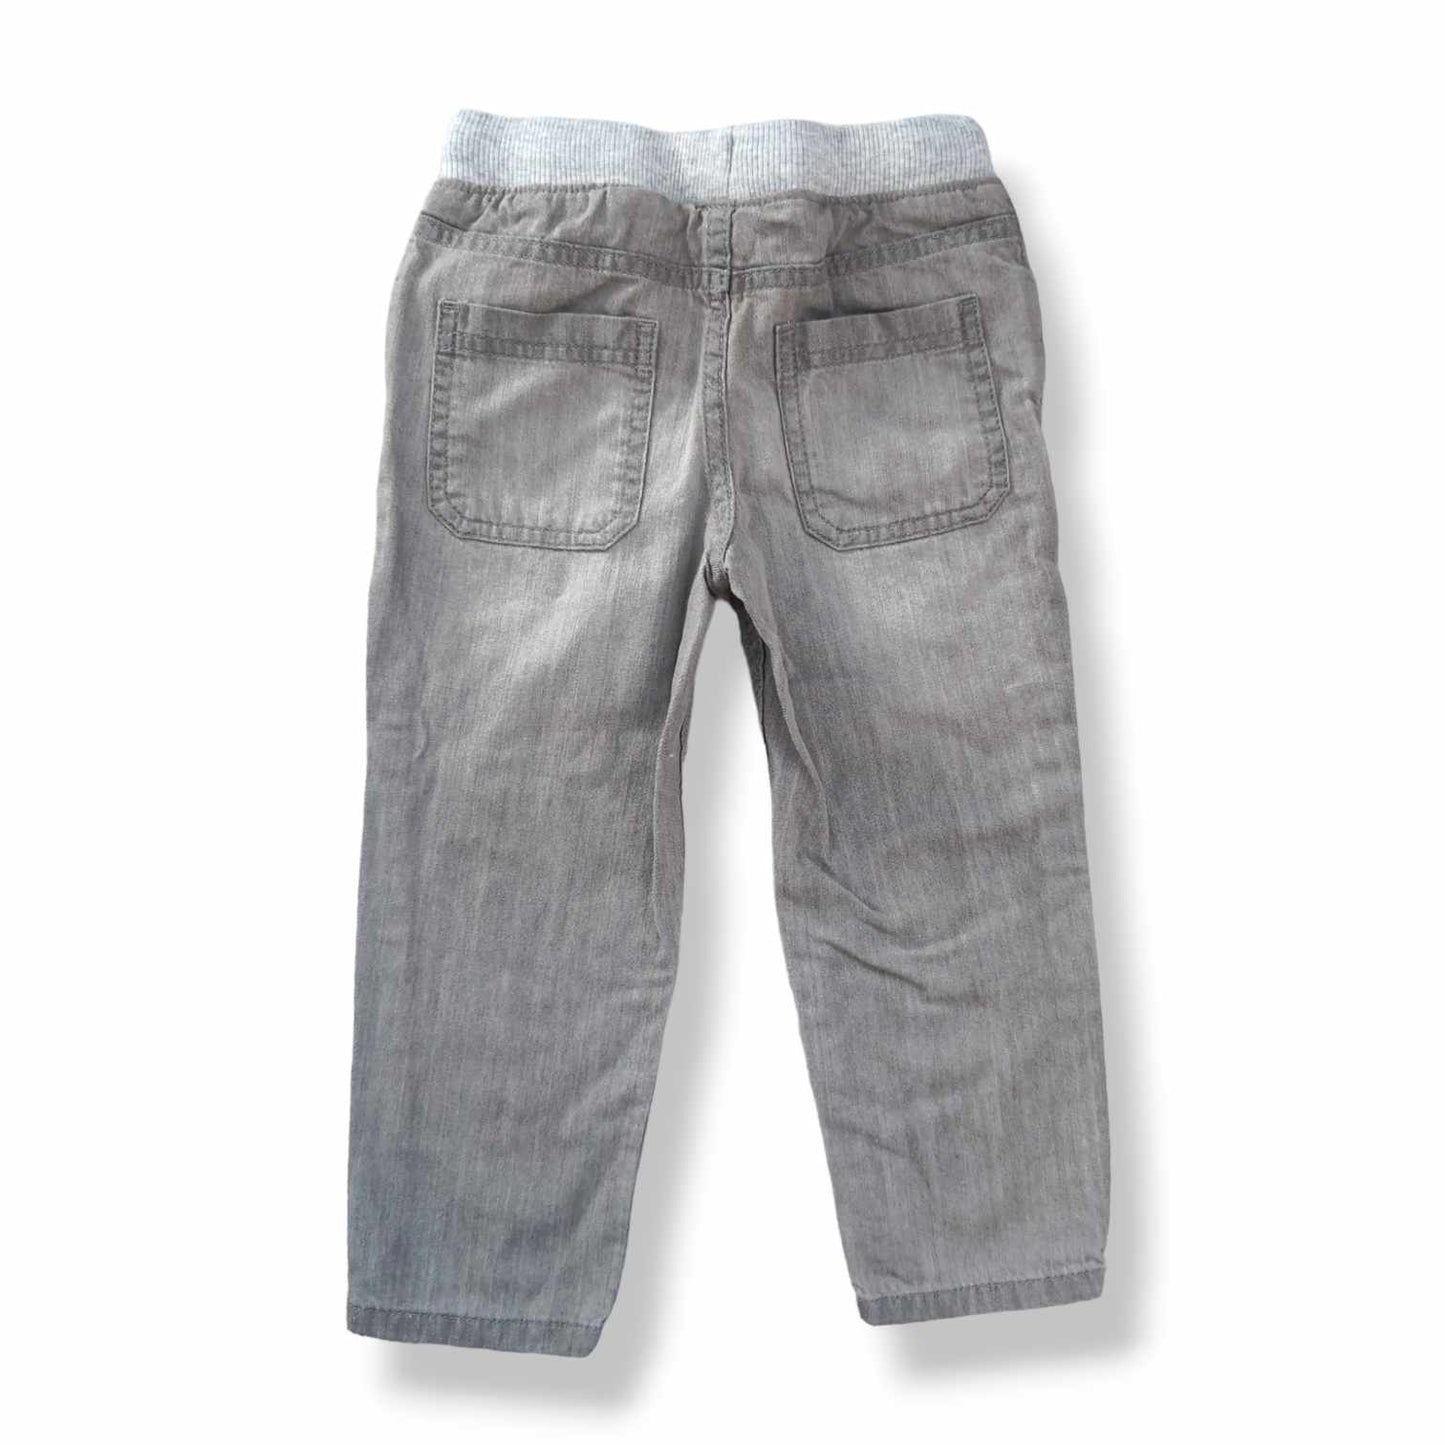 Carters 3T Jeans